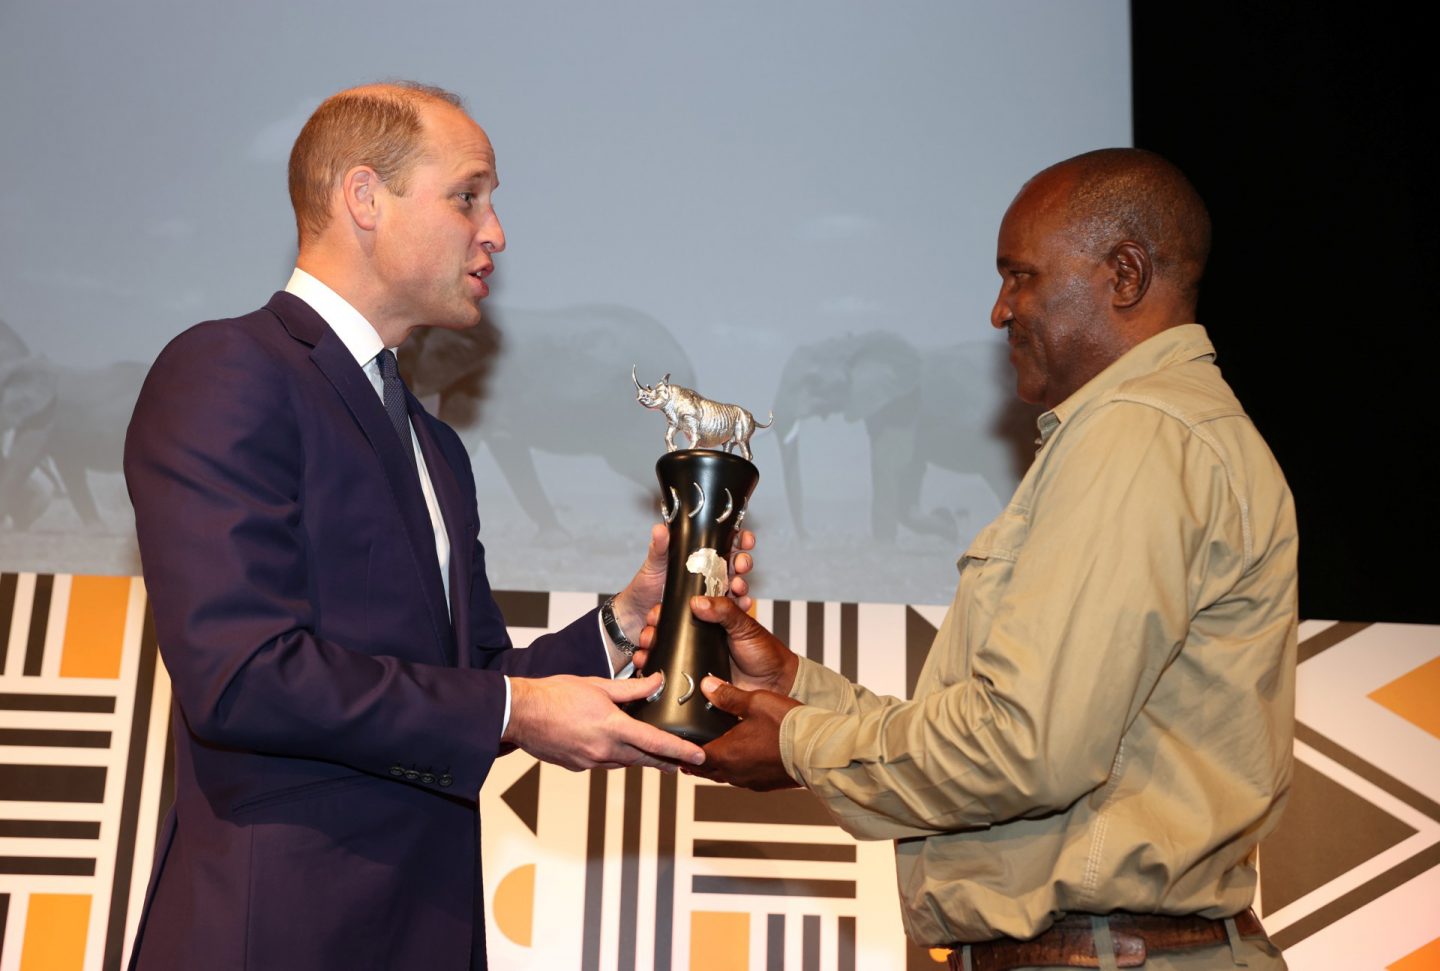  (L-R) Prince William, Duke of Cambridge presents Simson Uri-Khob with his award during the Tusk Conservation Awards 2021 at BFI Southbank on November 22, 2021 in London, England.